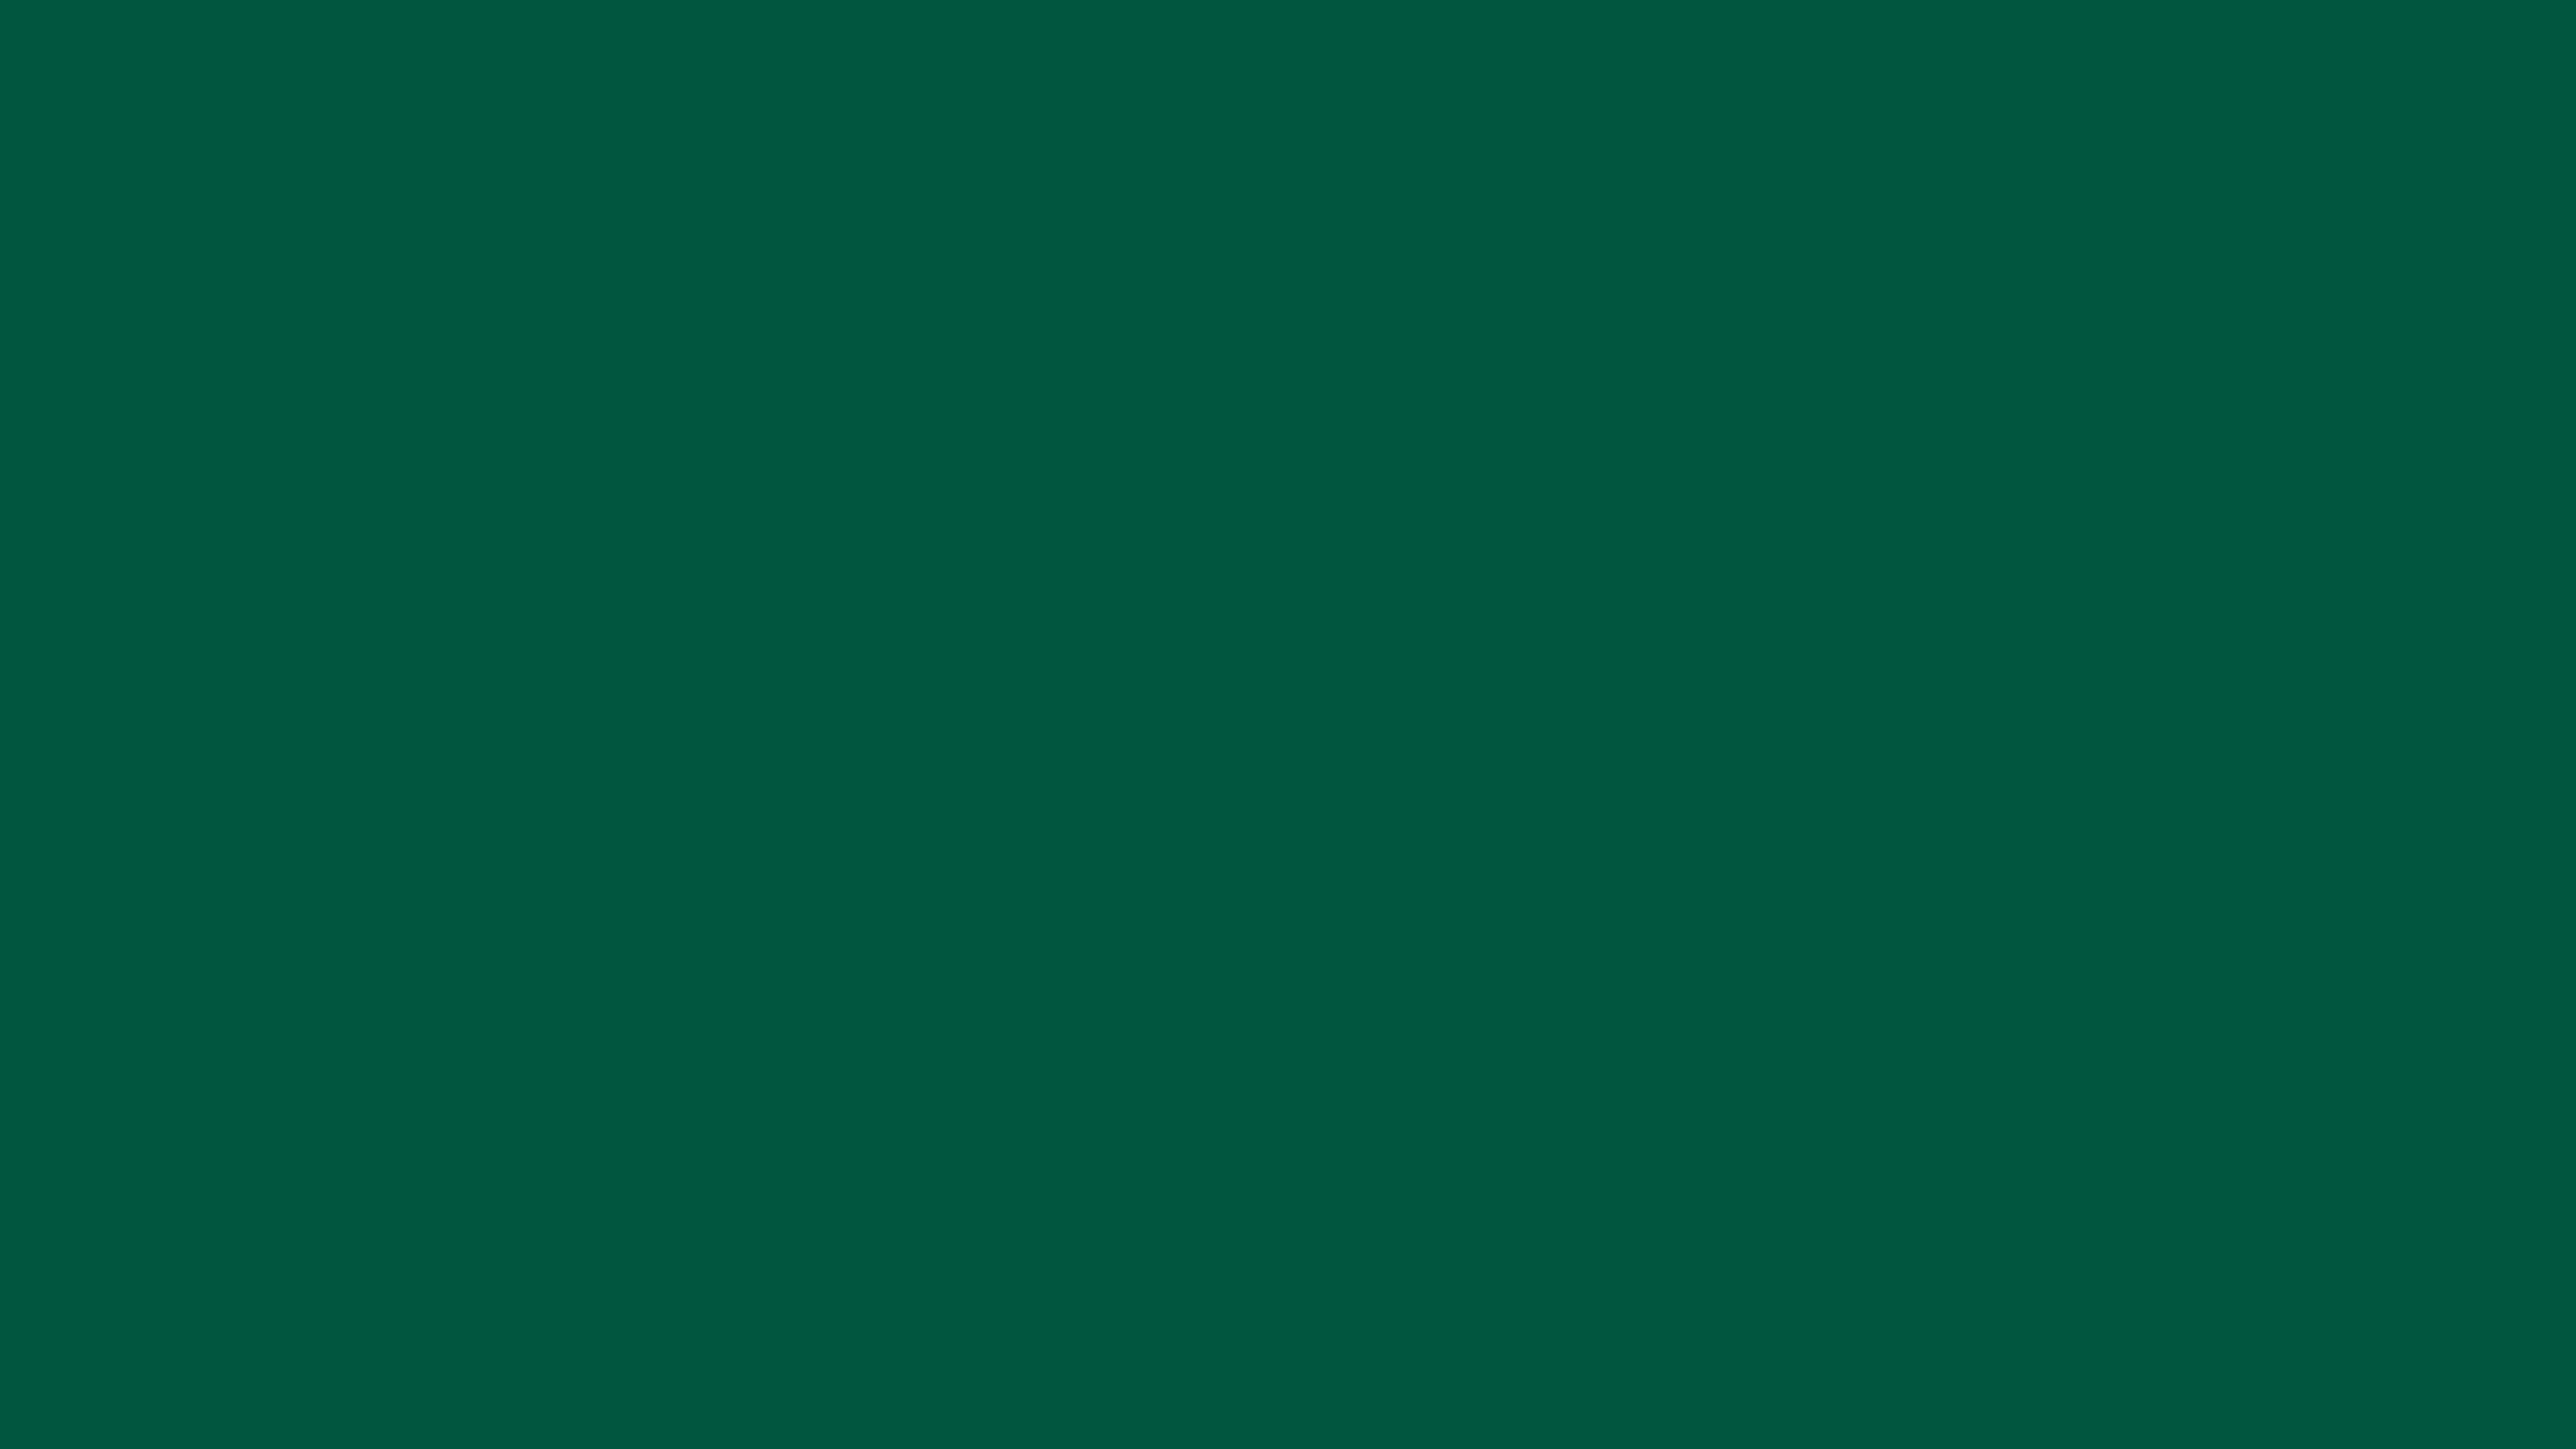 5120x2880 Sacramento State Green Solid Color Background